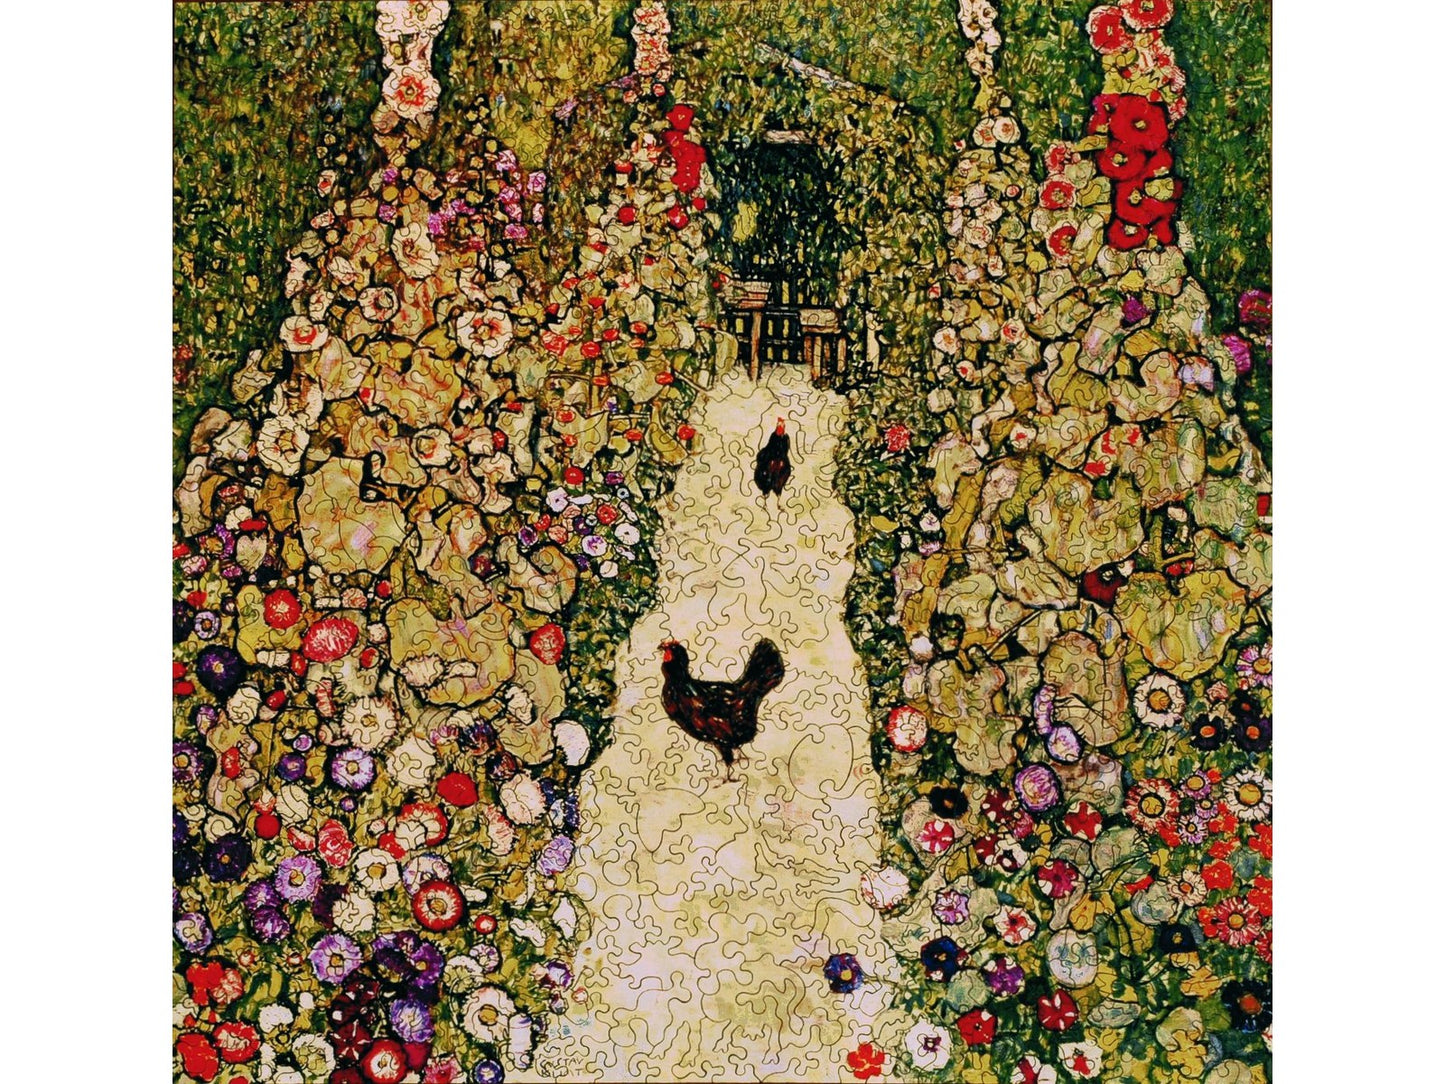 The front of the puzzle, Garden Path with Chickens, which shows an abstract painting of two chickens on a path surrounded by hedges of flowers.